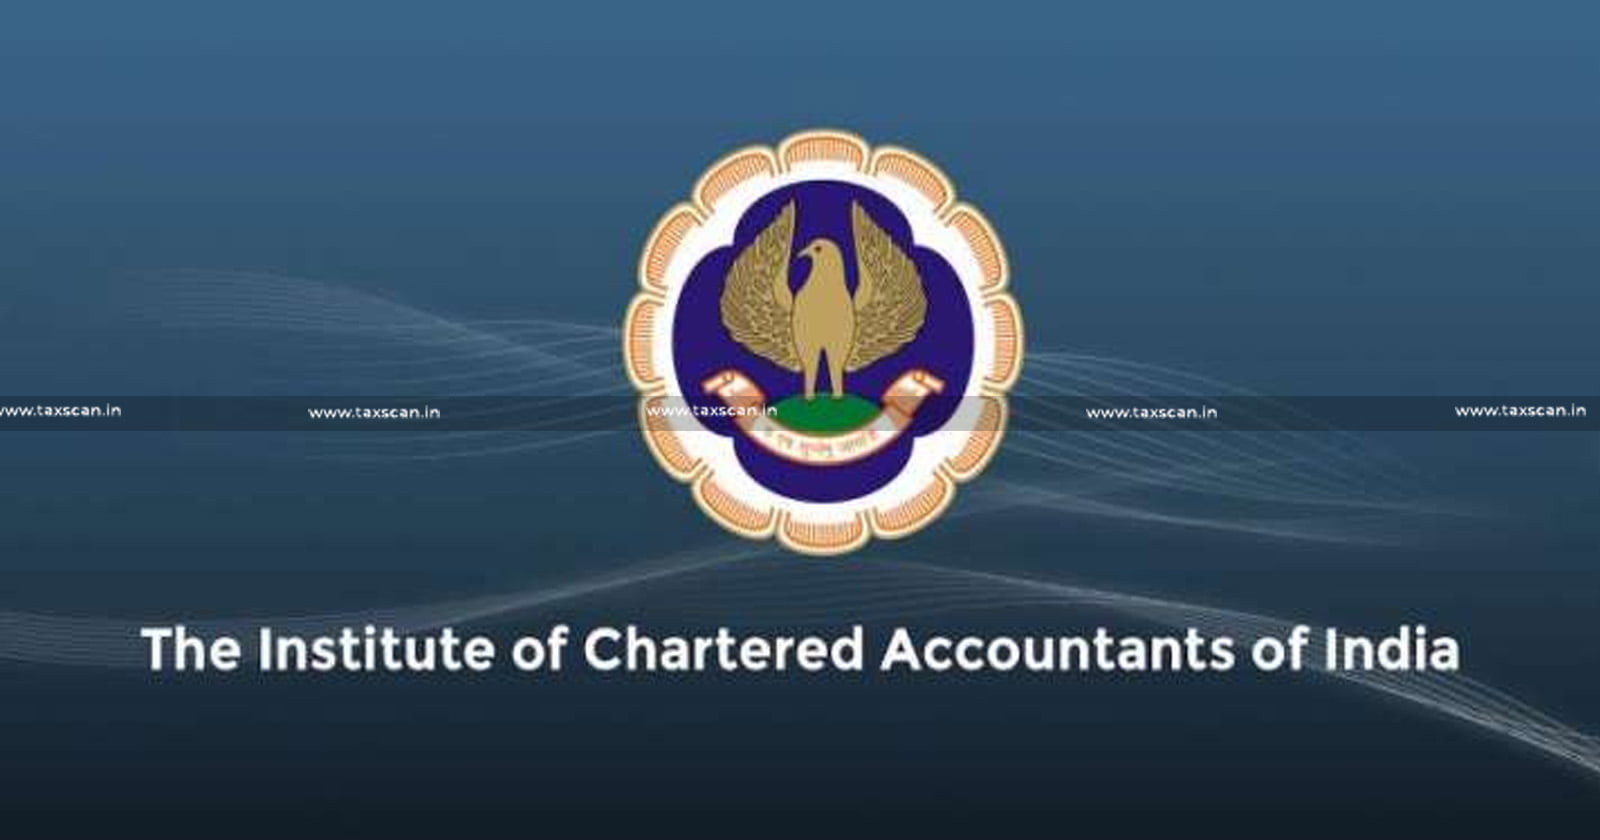 Chartered Accountant - ICAI Disciplinary Committee - CA - Professional Misconduct - Connivance - Incorporation of Shell Companies - taxscan